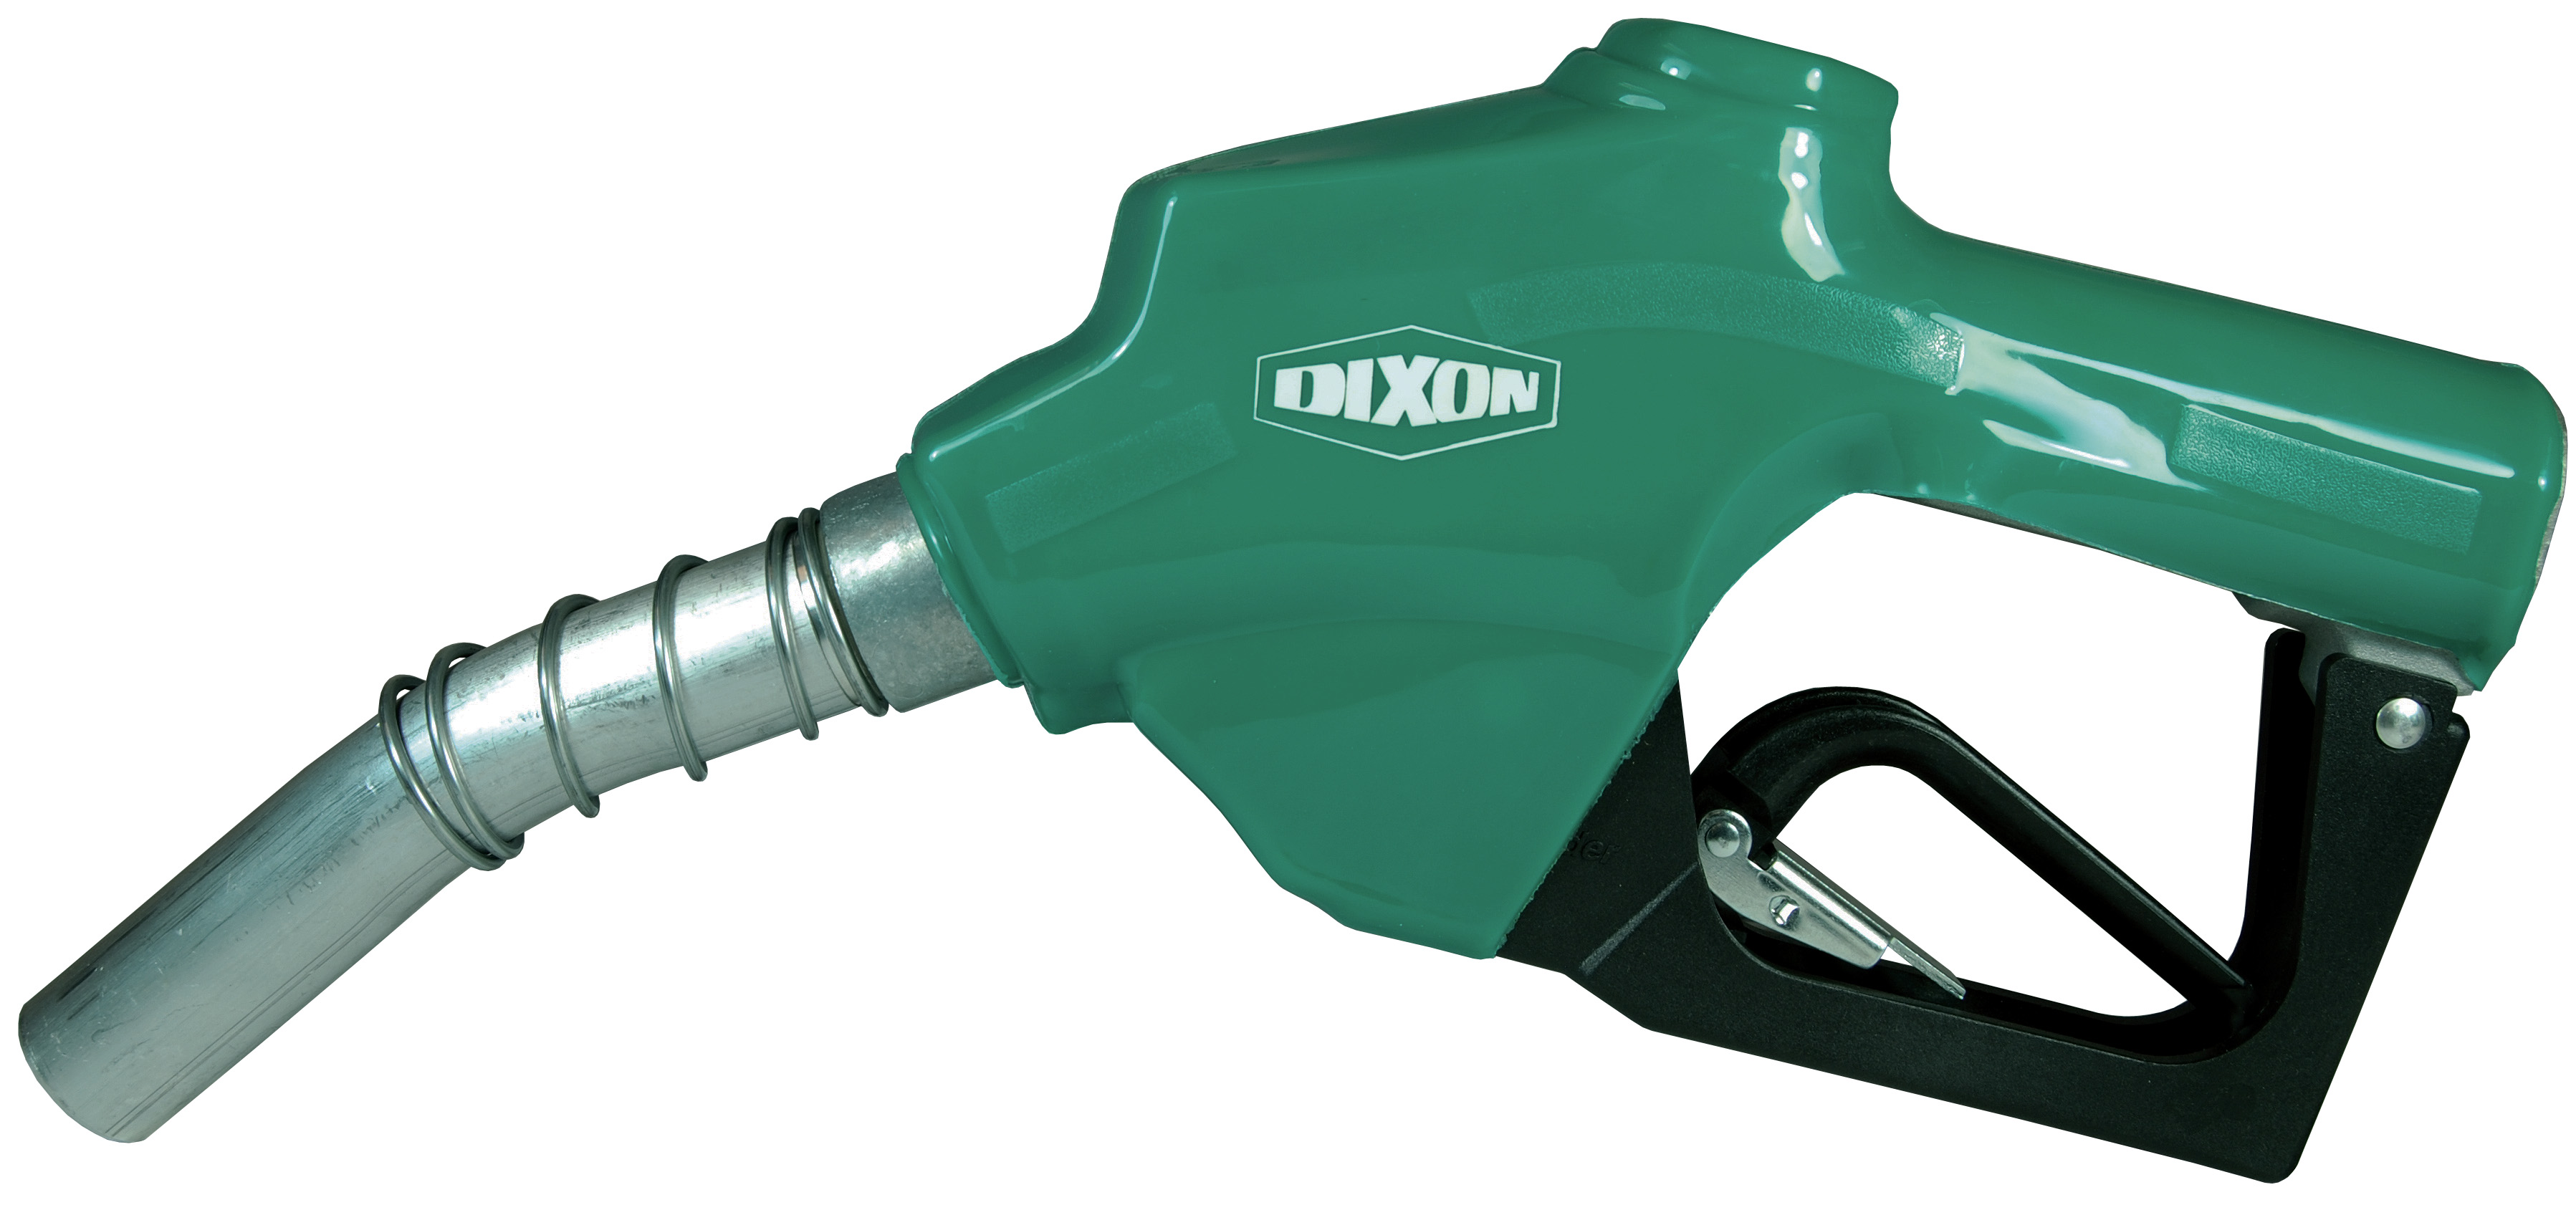 UL FUELMASTER™ DIESEL NOZZLE WITH SAFETY VALVE